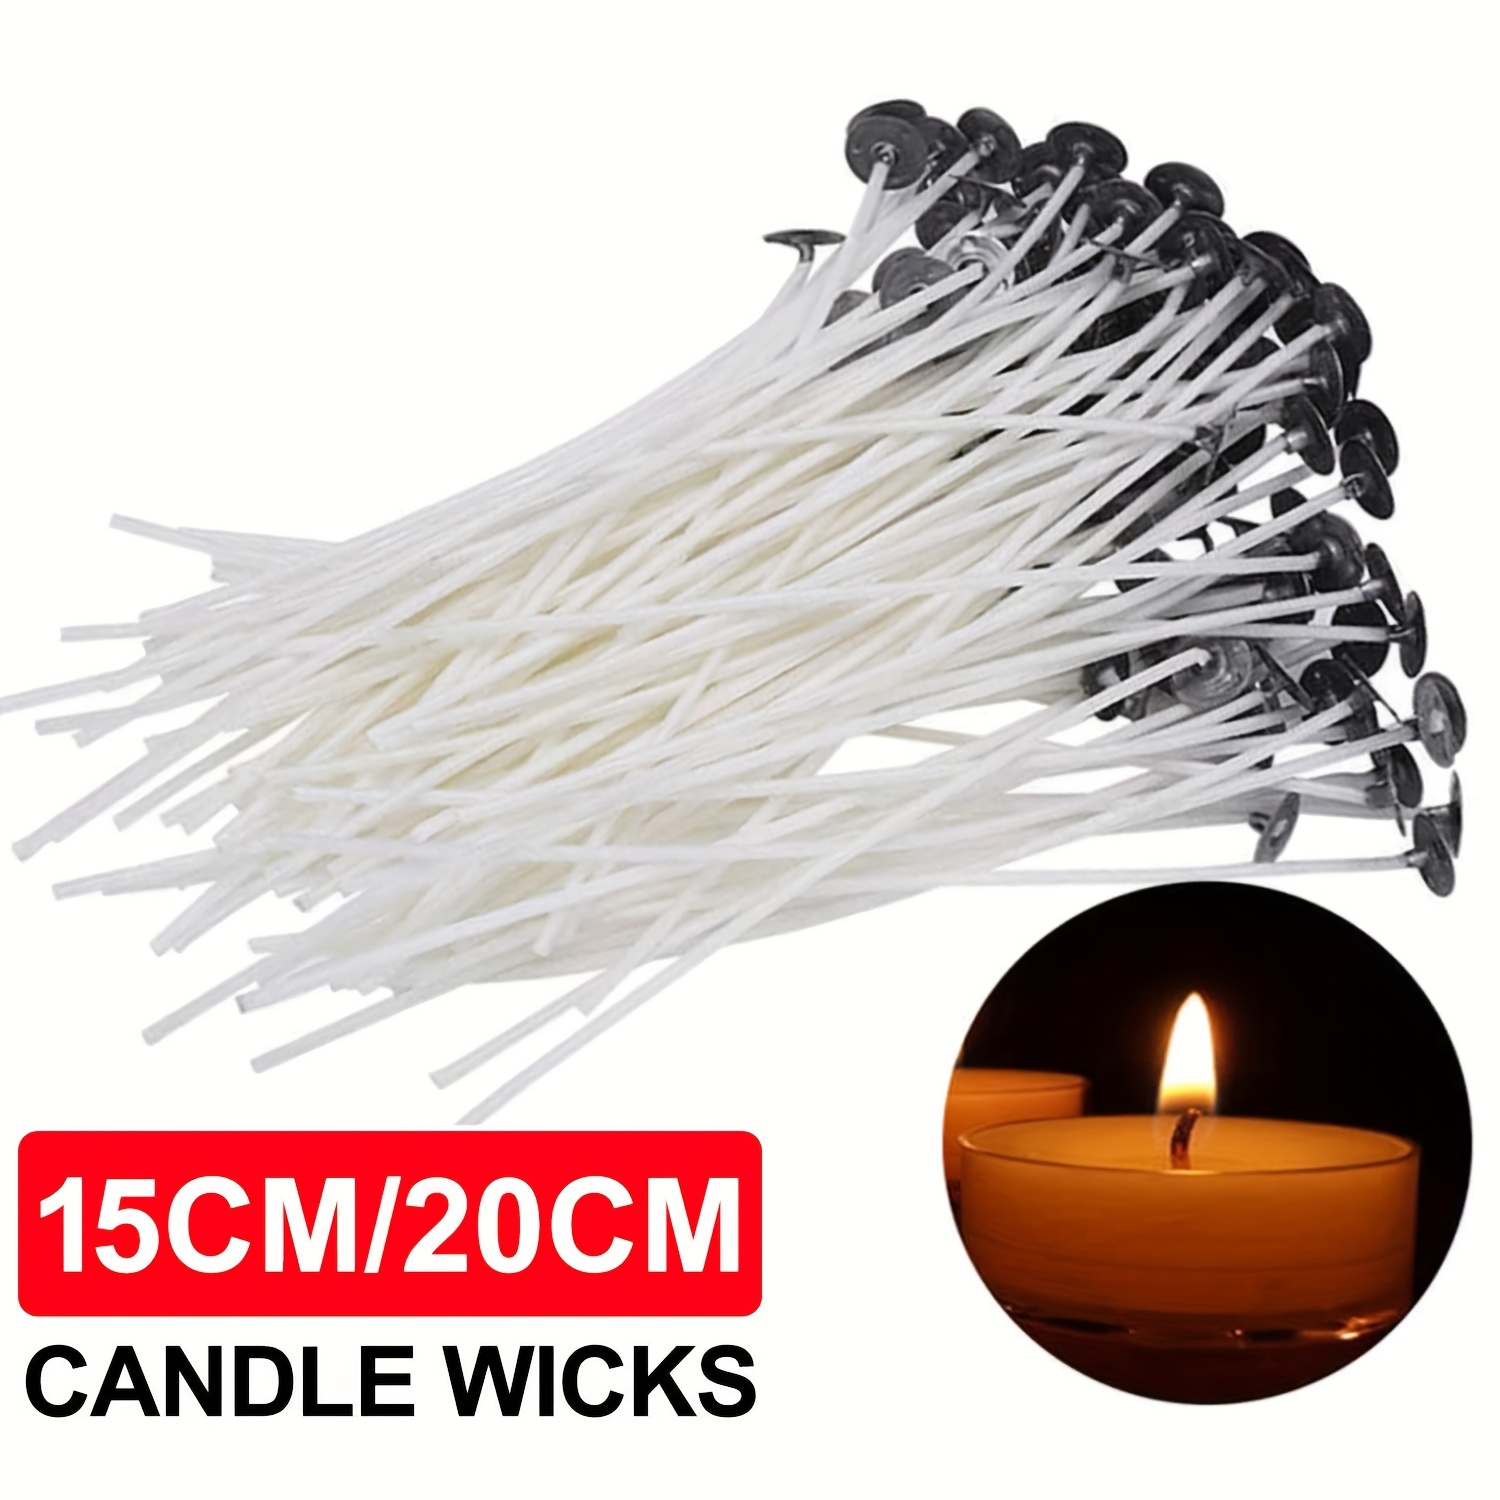 1set Candle Wicks 60pcs (4in, 6in, 8in) With 2 Candle Wick Holders & 60  Glue Dots, Long Lasting Pre-Waxed & Tabbed Cotton Threads With No Black  Smoke